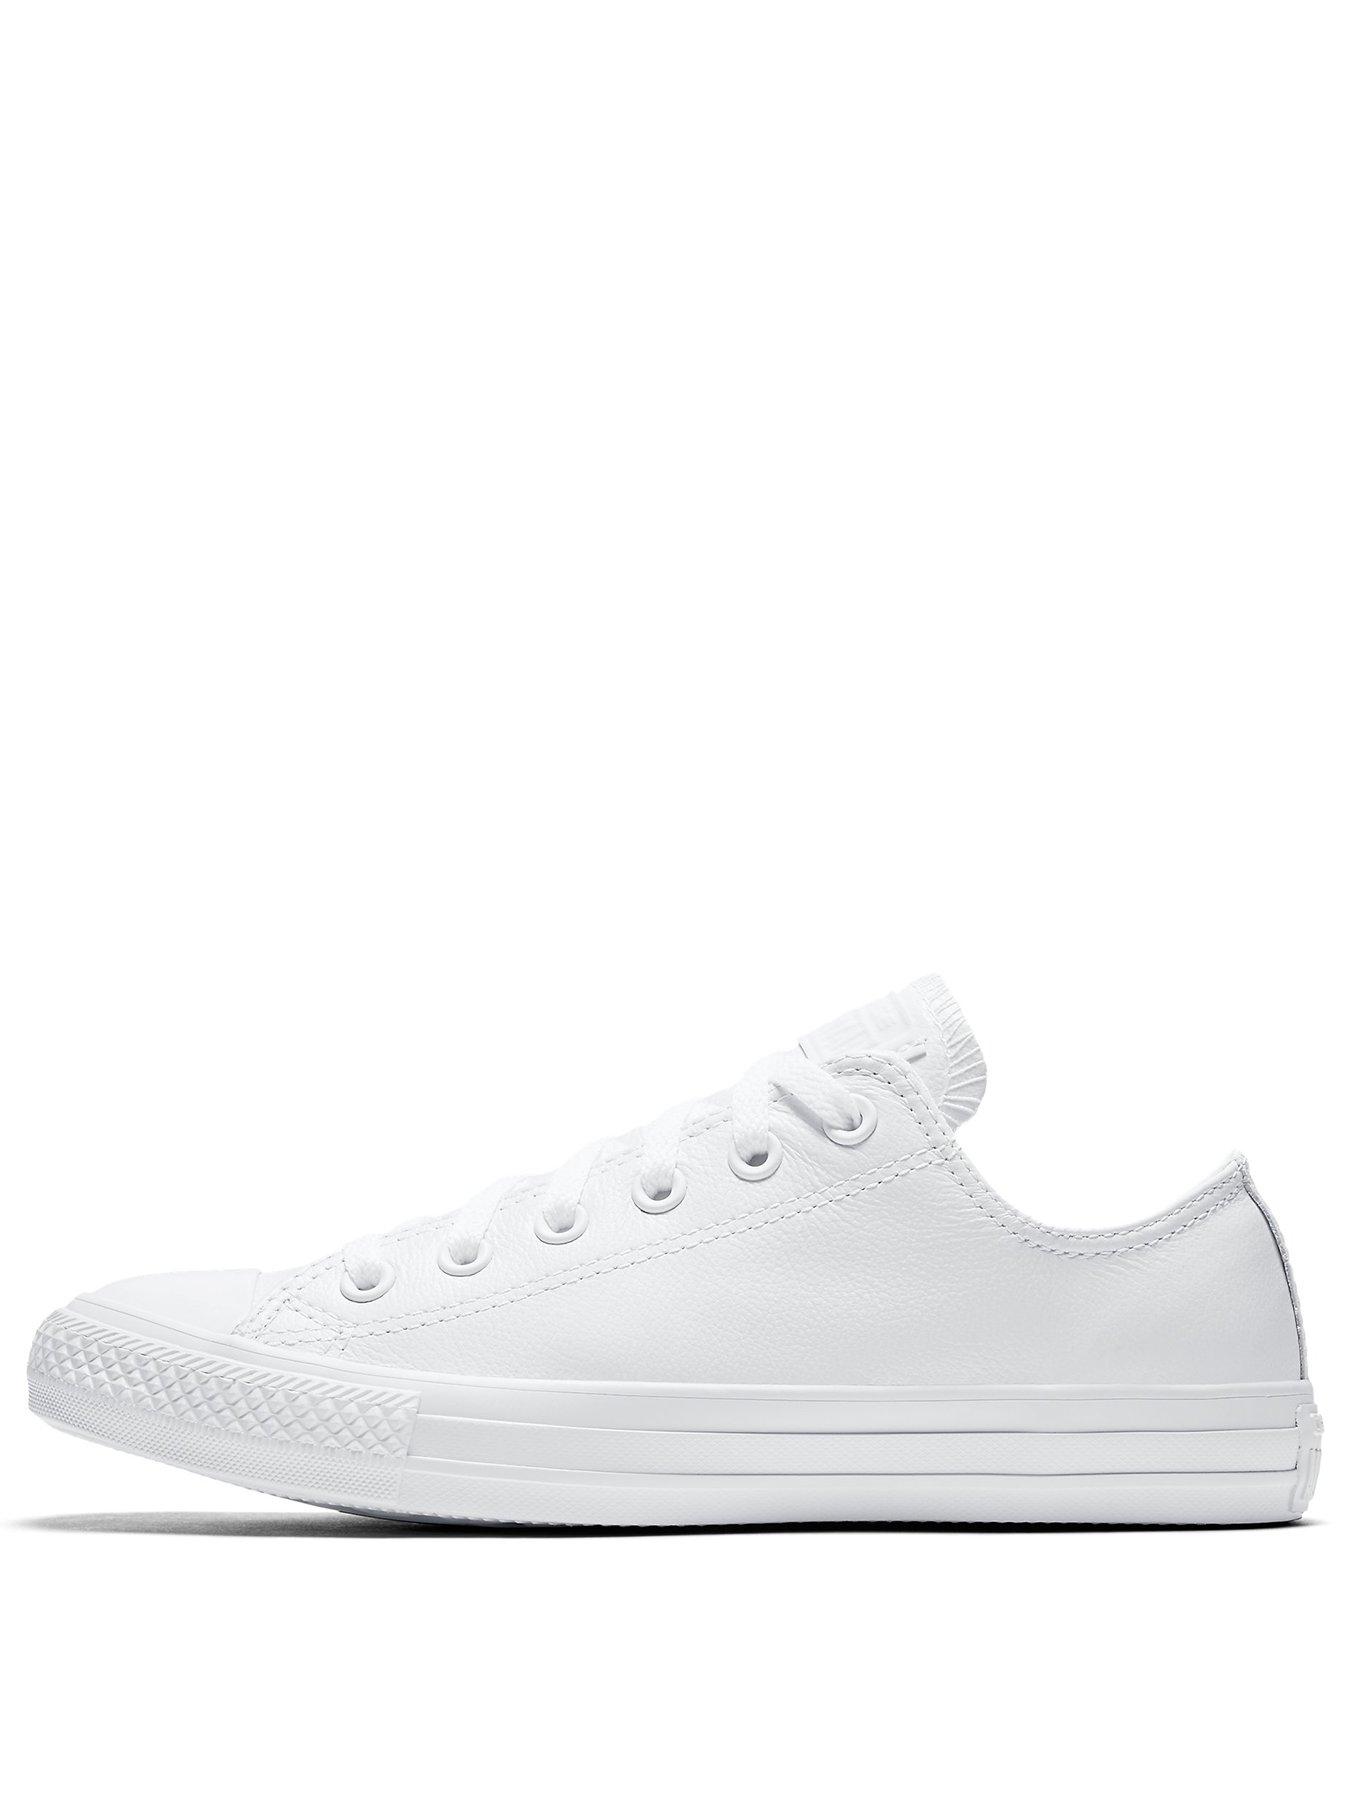 all white converse with black line